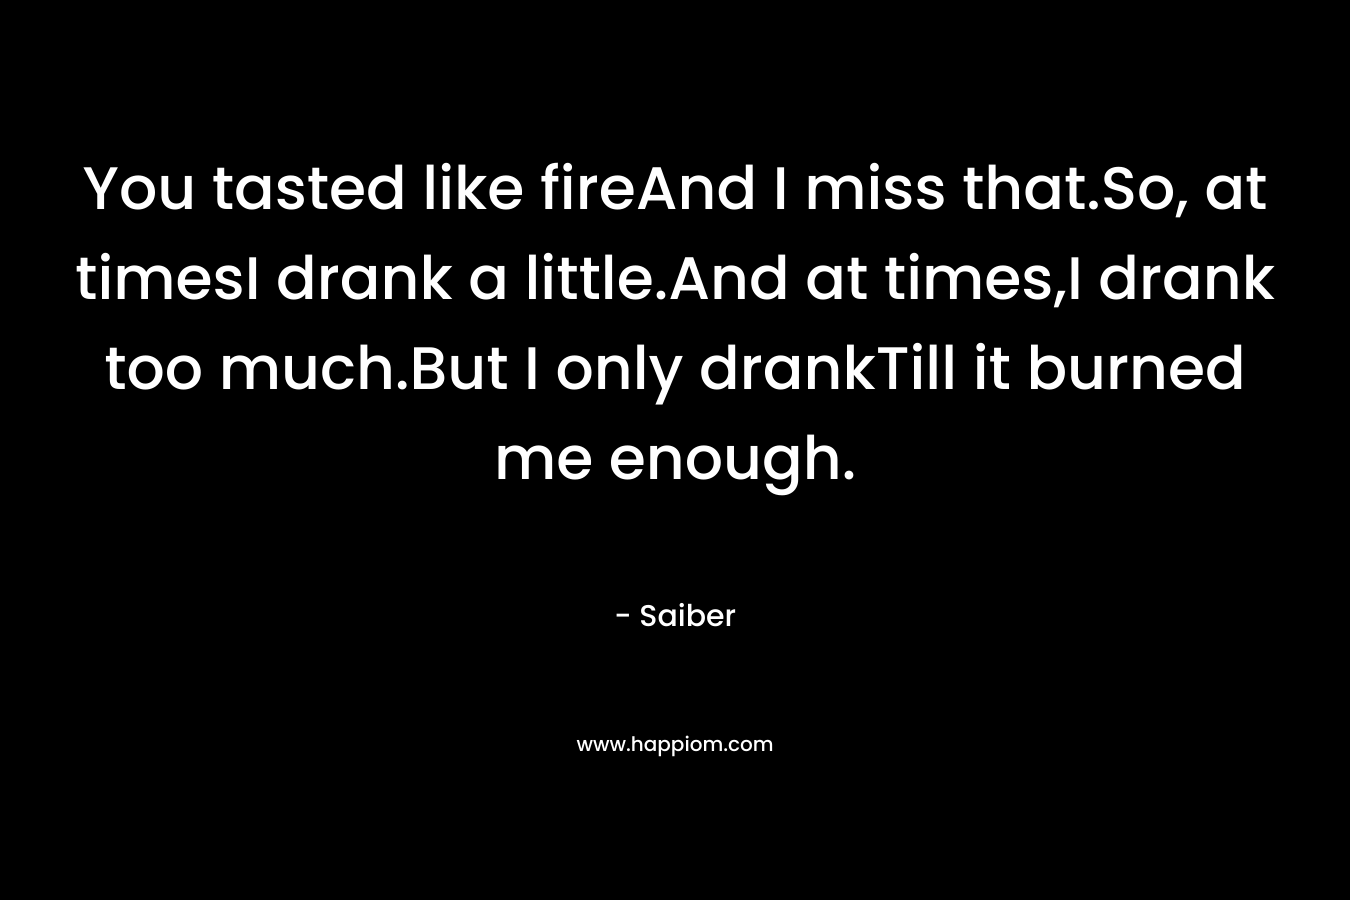 You tasted like fireAnd I miss that.So, at timesI drank a little.And at times,I drank too much.But I only drankTill it burned me enough. – Saiber